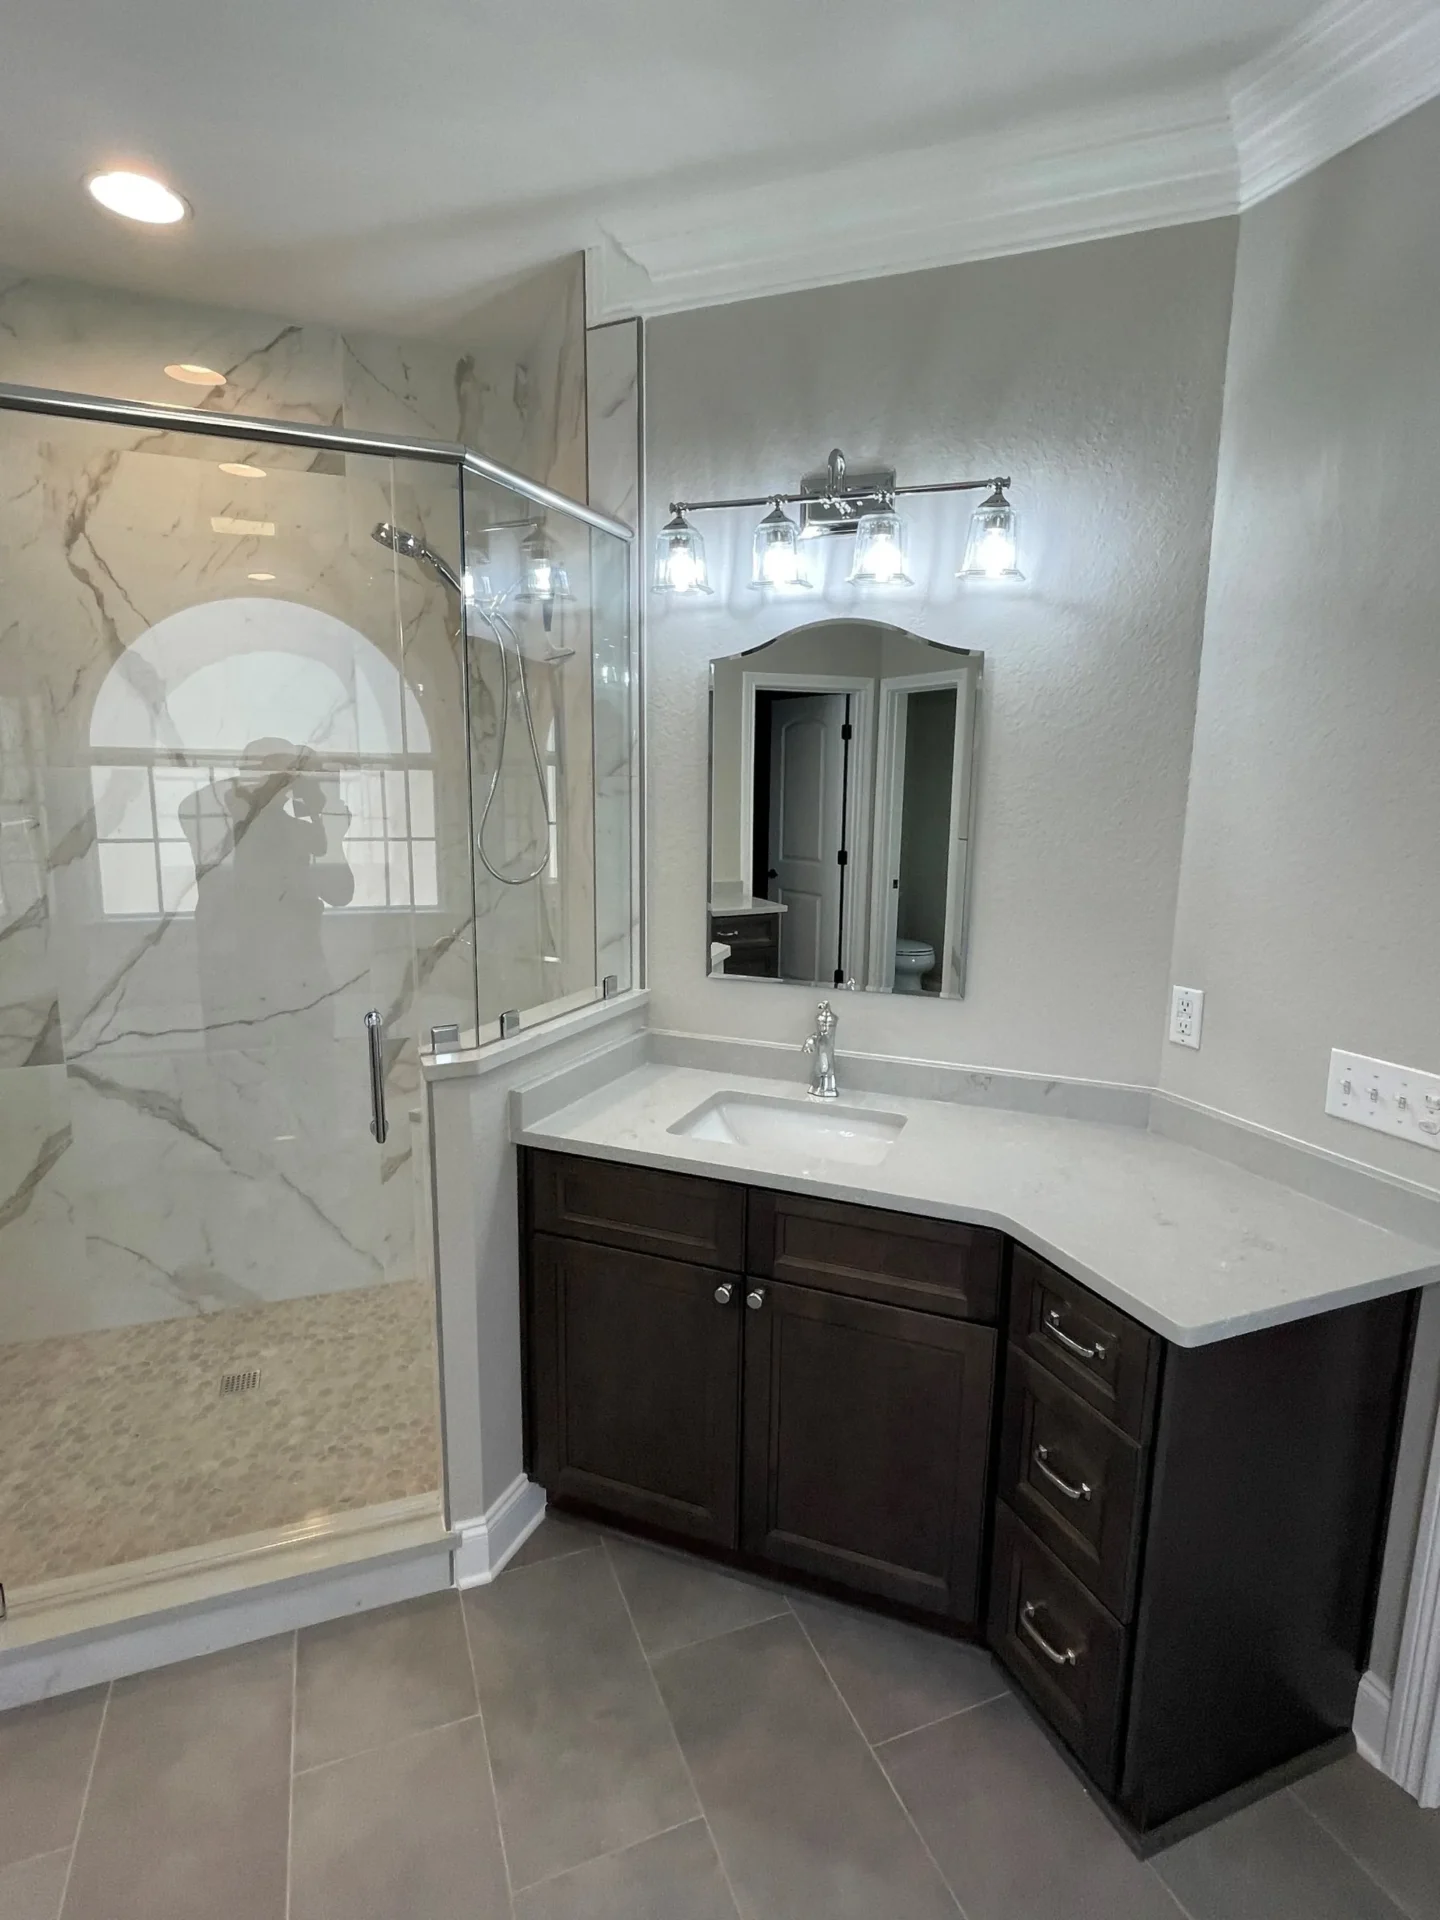 A bathroom with marble walls and floors, and a large mirror.